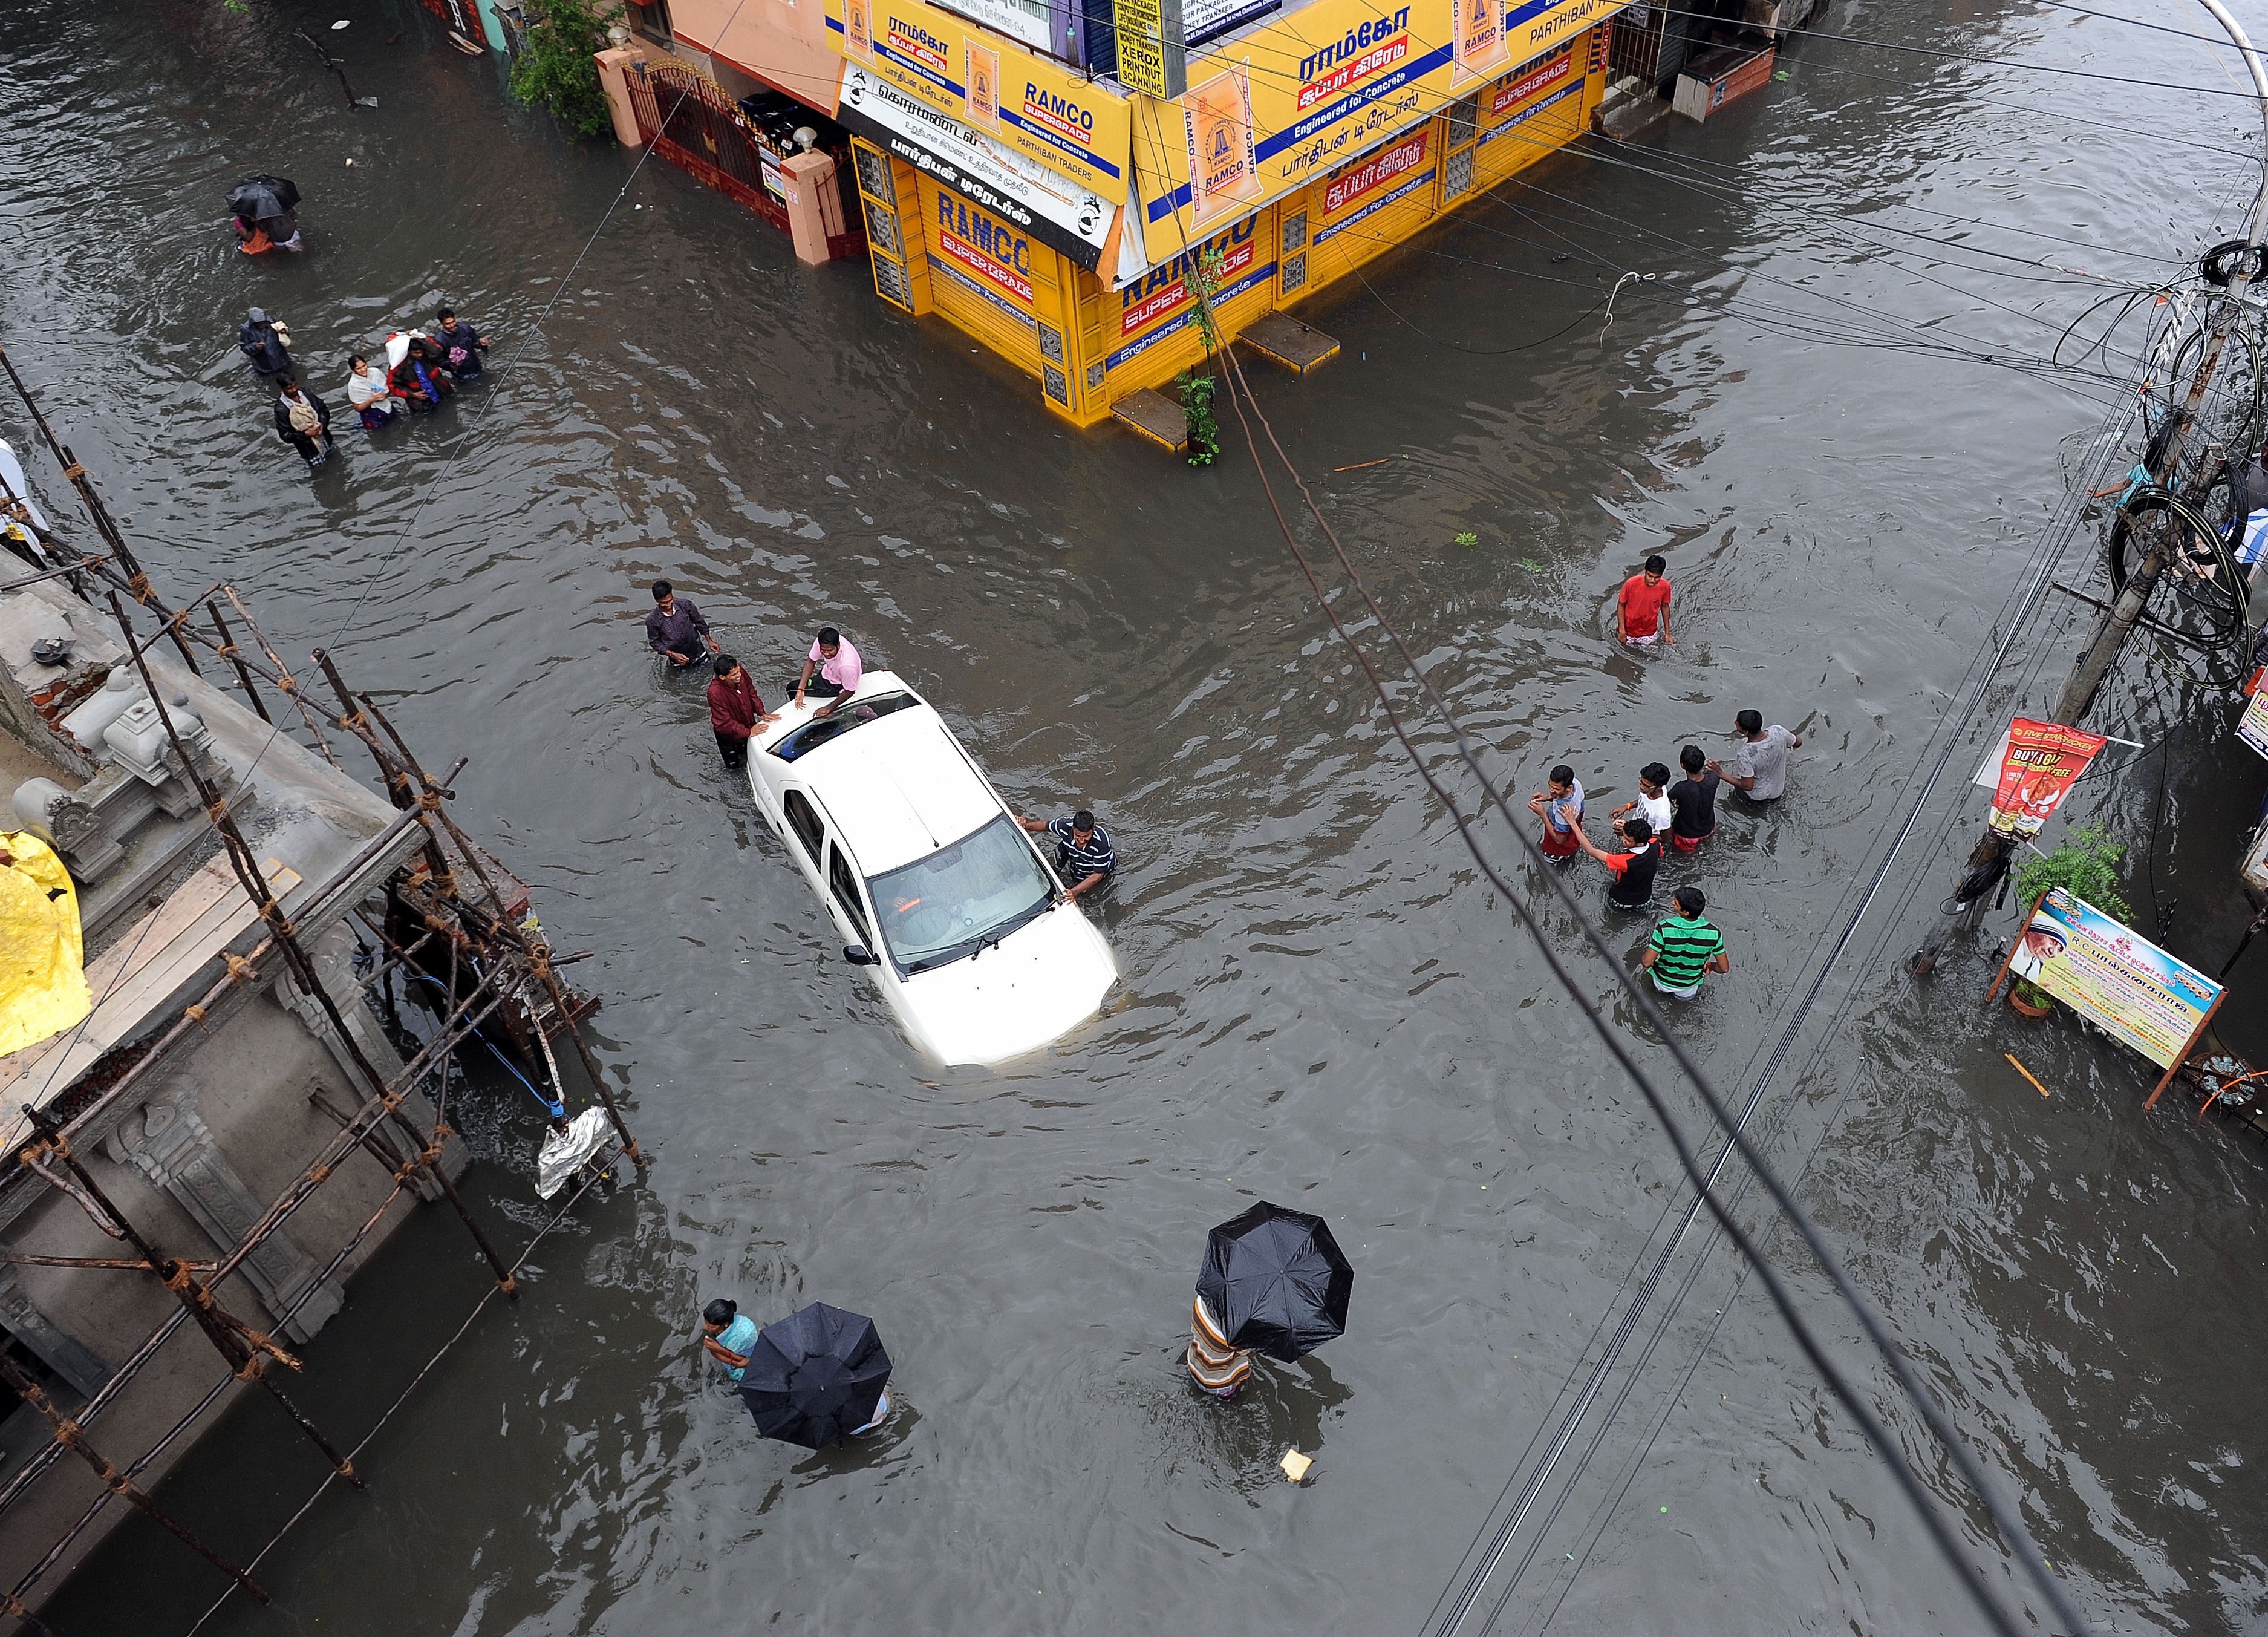 Indian residents attempt to push a vehicle through floodwaters as others wade past in Chennai on Dec. 2, 2015 (STRDEL—AFP/Getty Images)